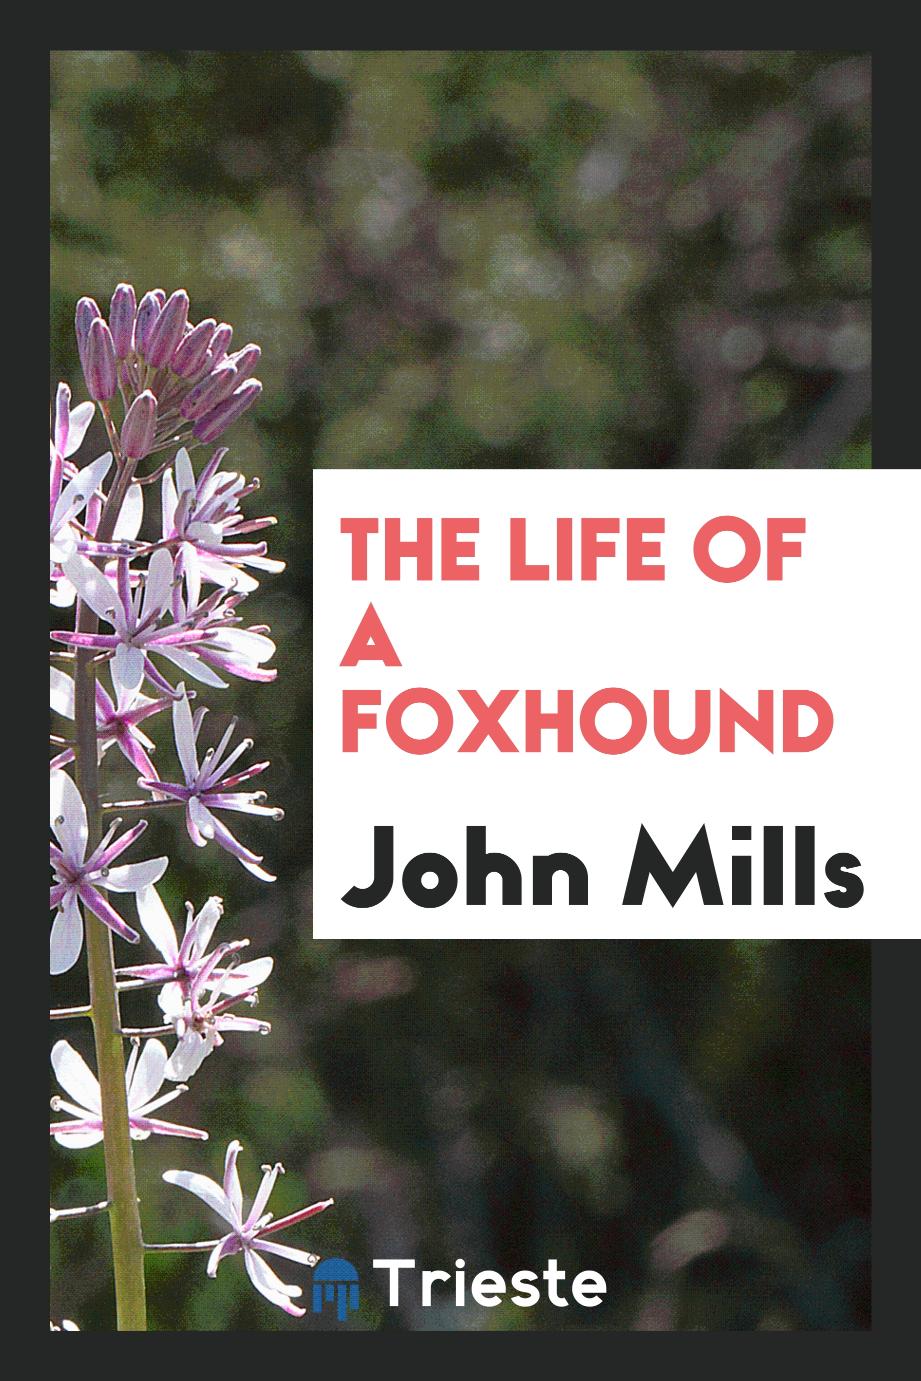 The life of a foxhound